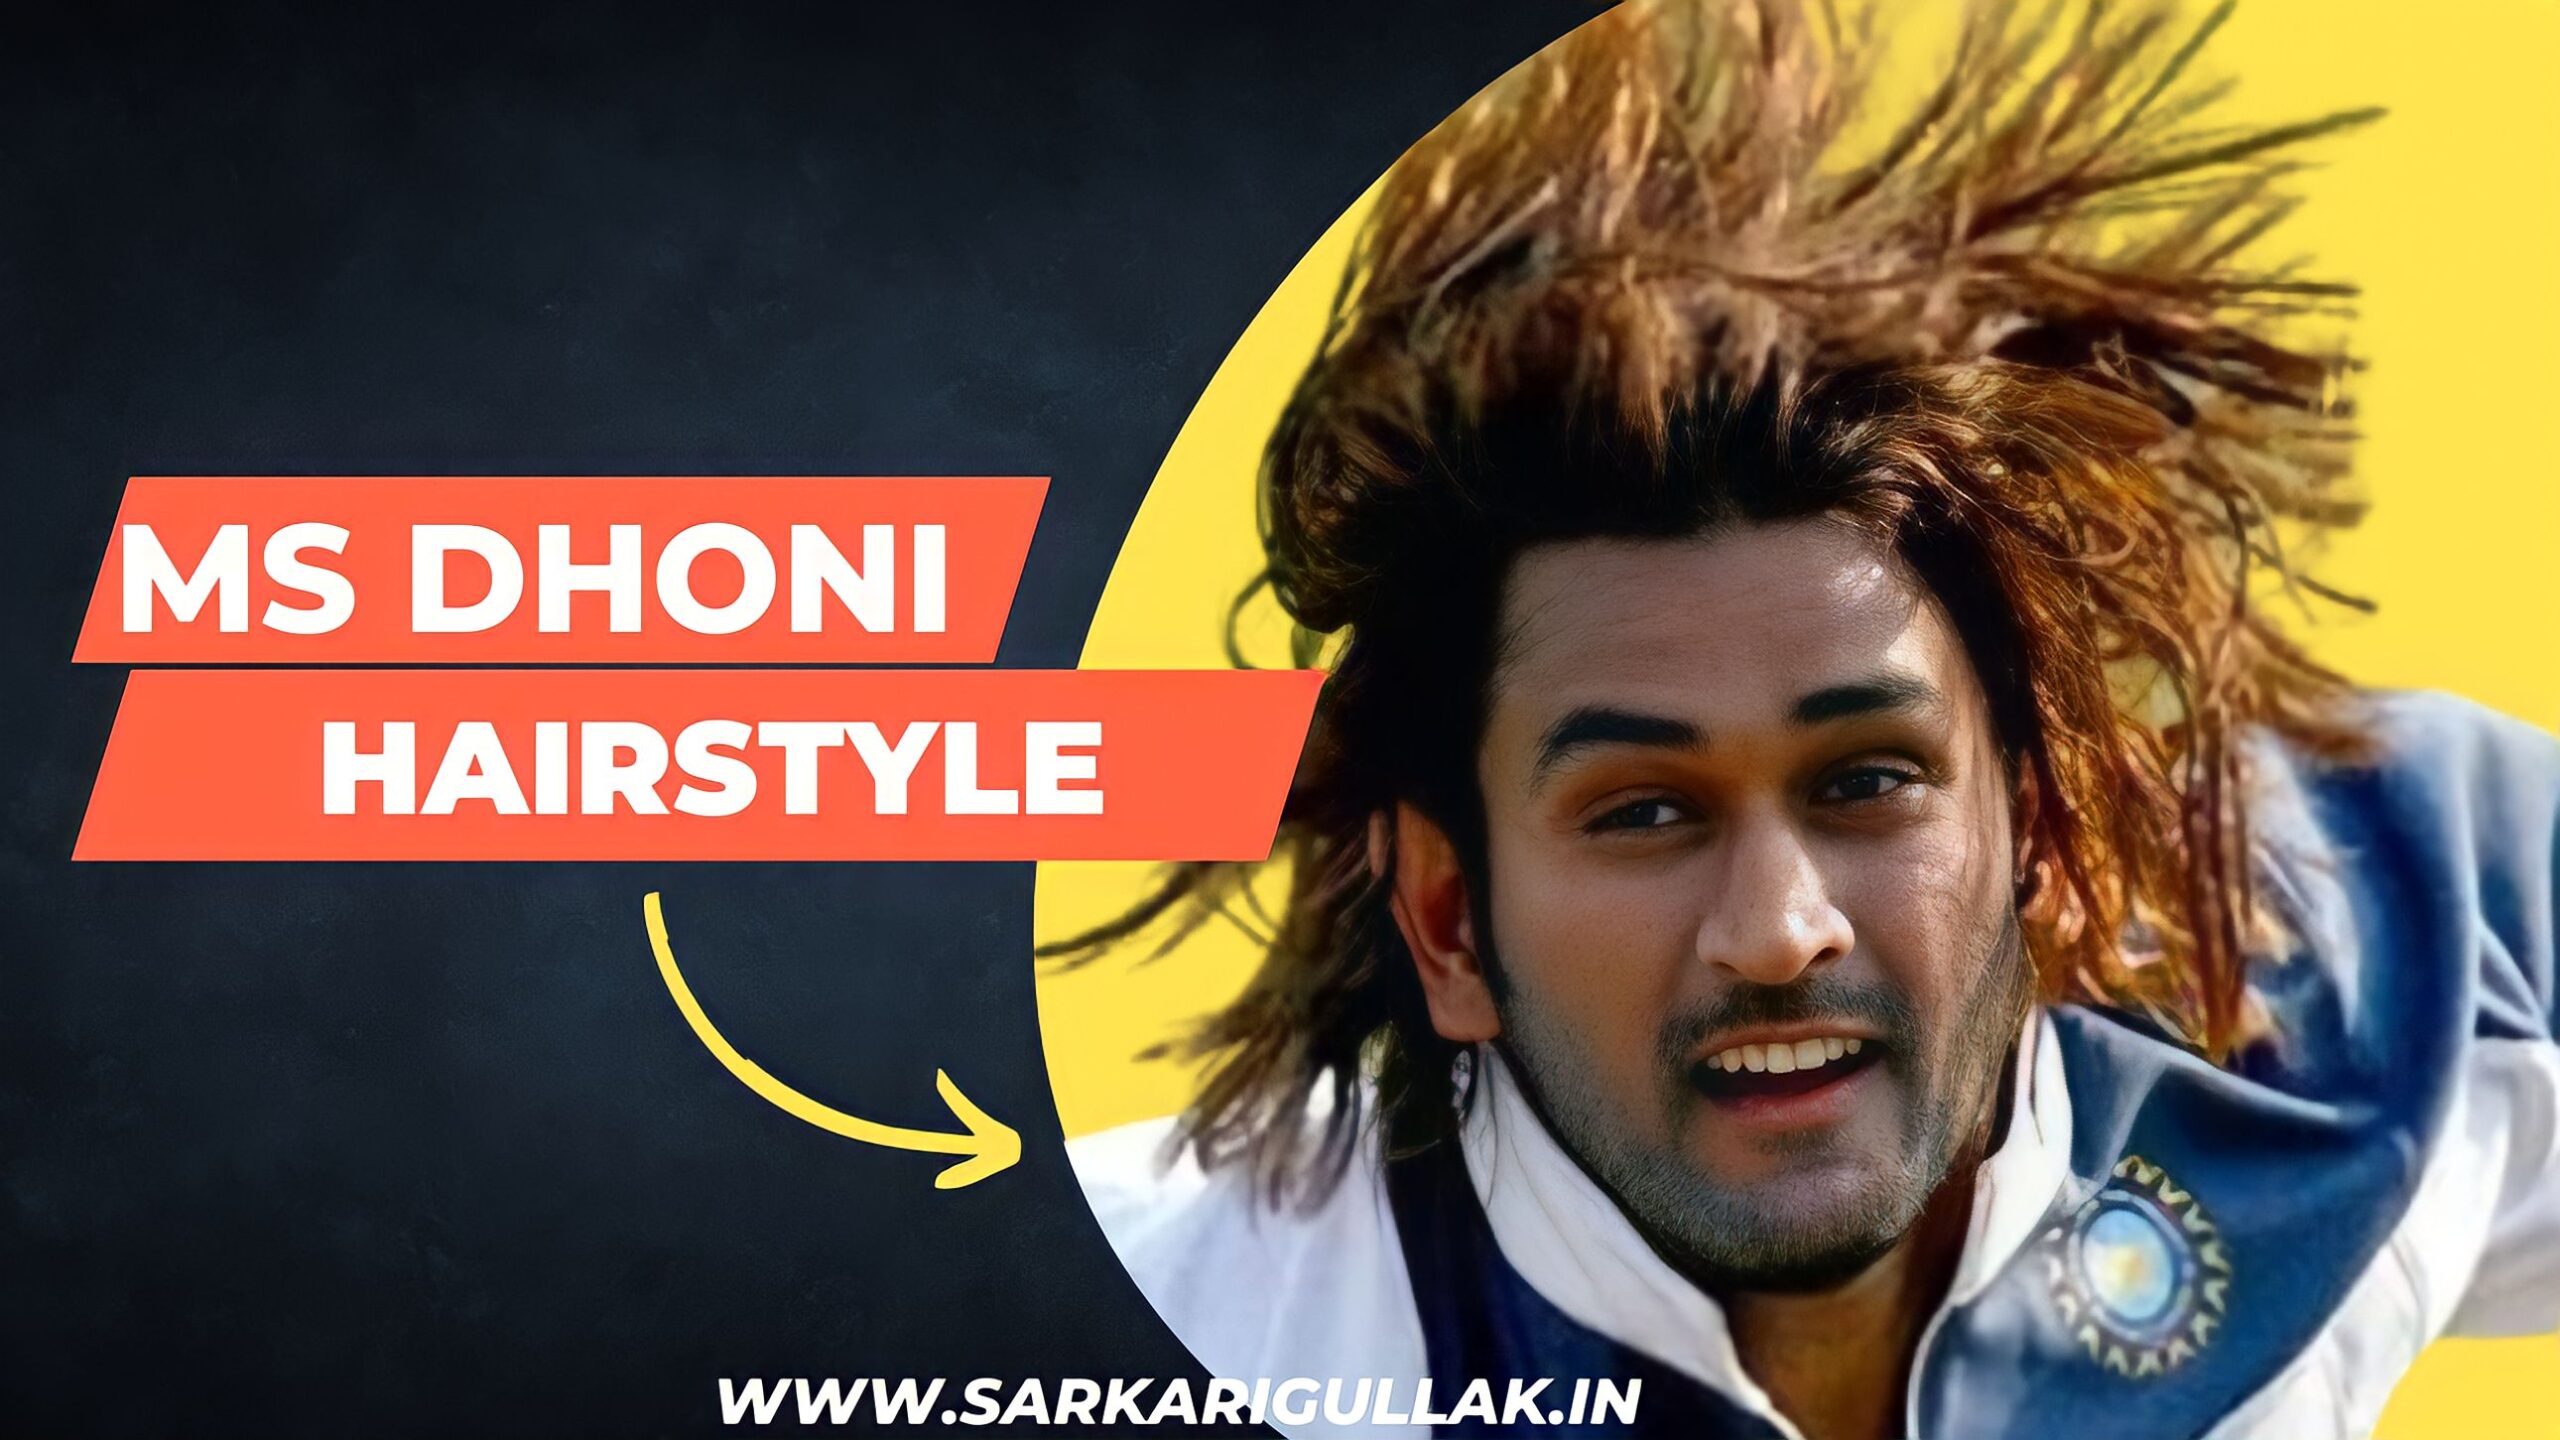 Coming Soon Dhoni in his long hair look  Cricket News